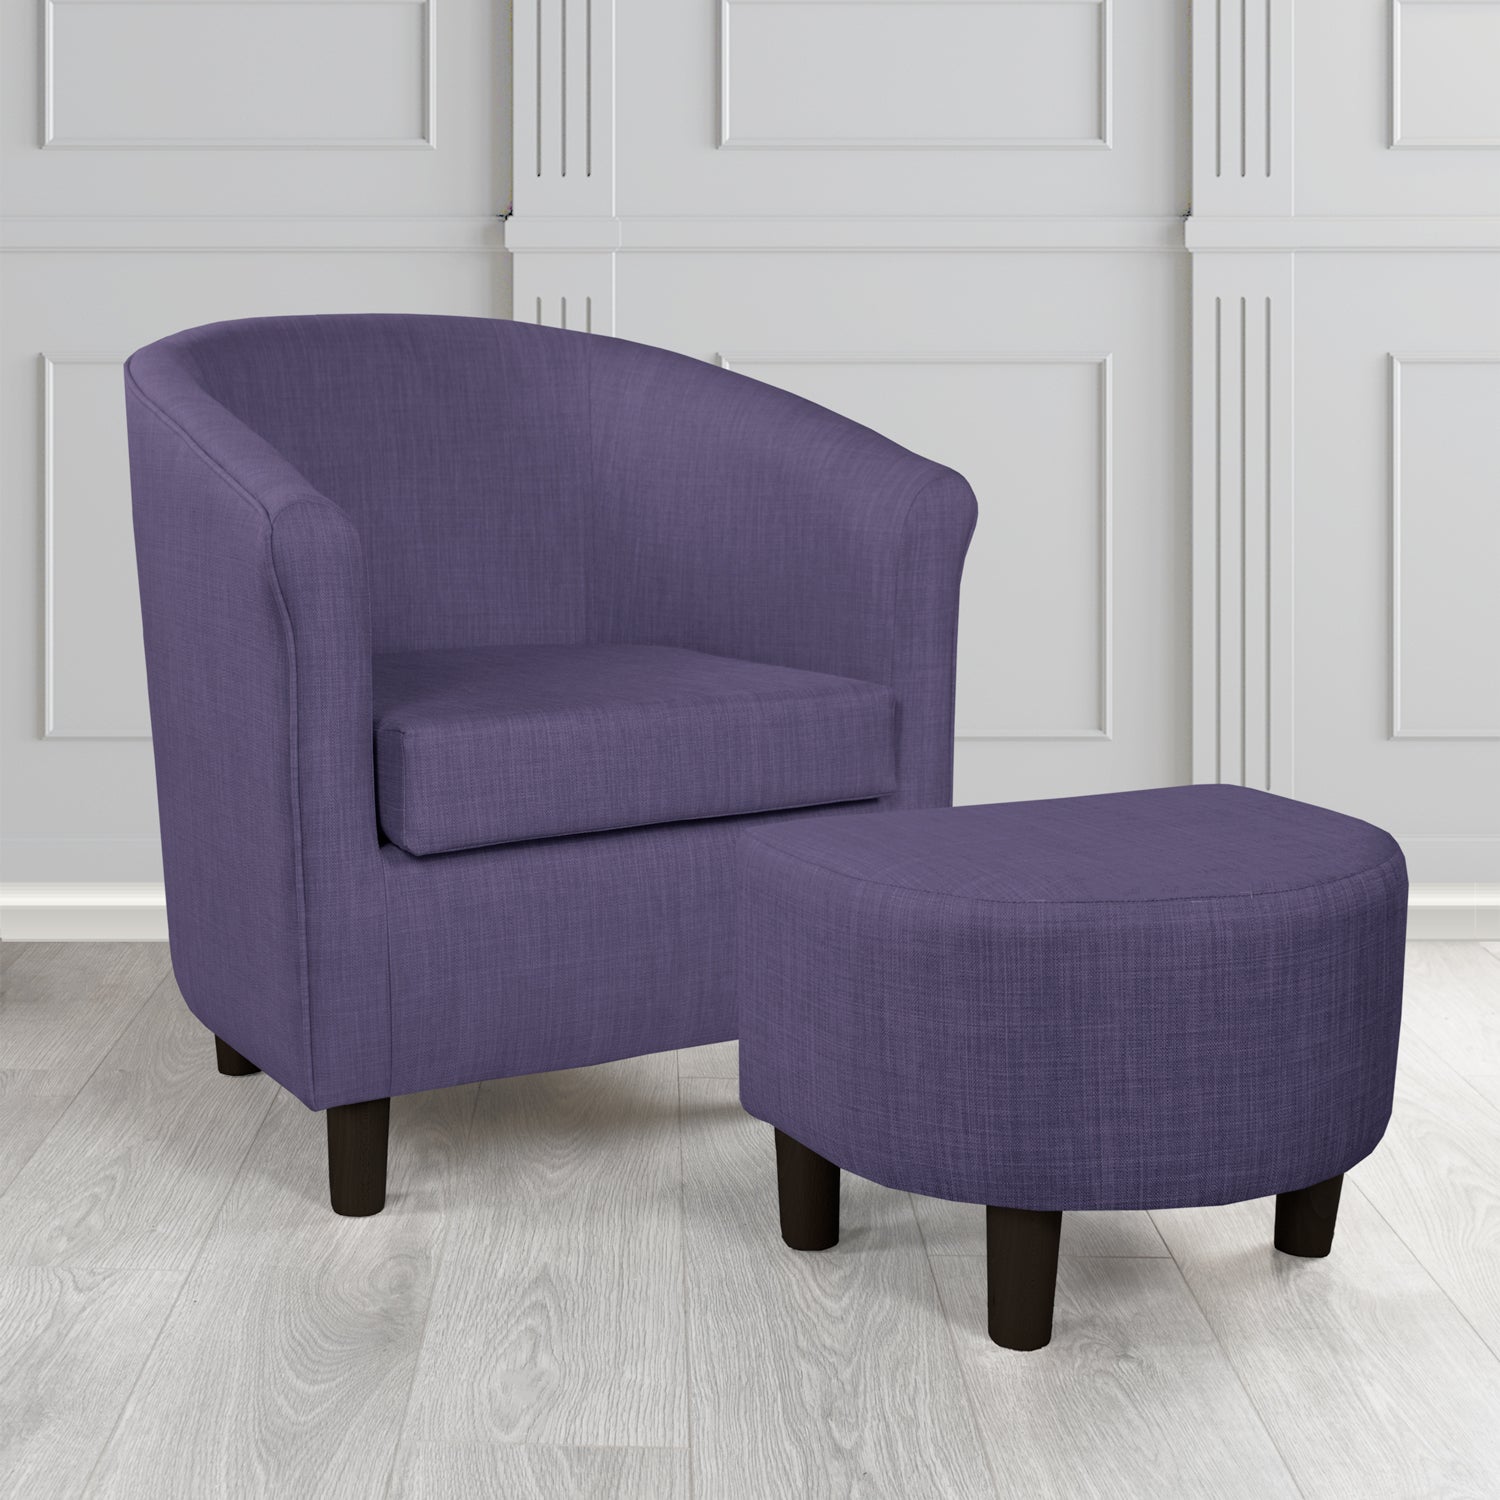 Tuscany Charles Purple Linen Plain Fabric Tub Chair with Dee Footstool Set - The Tub Chair Shop